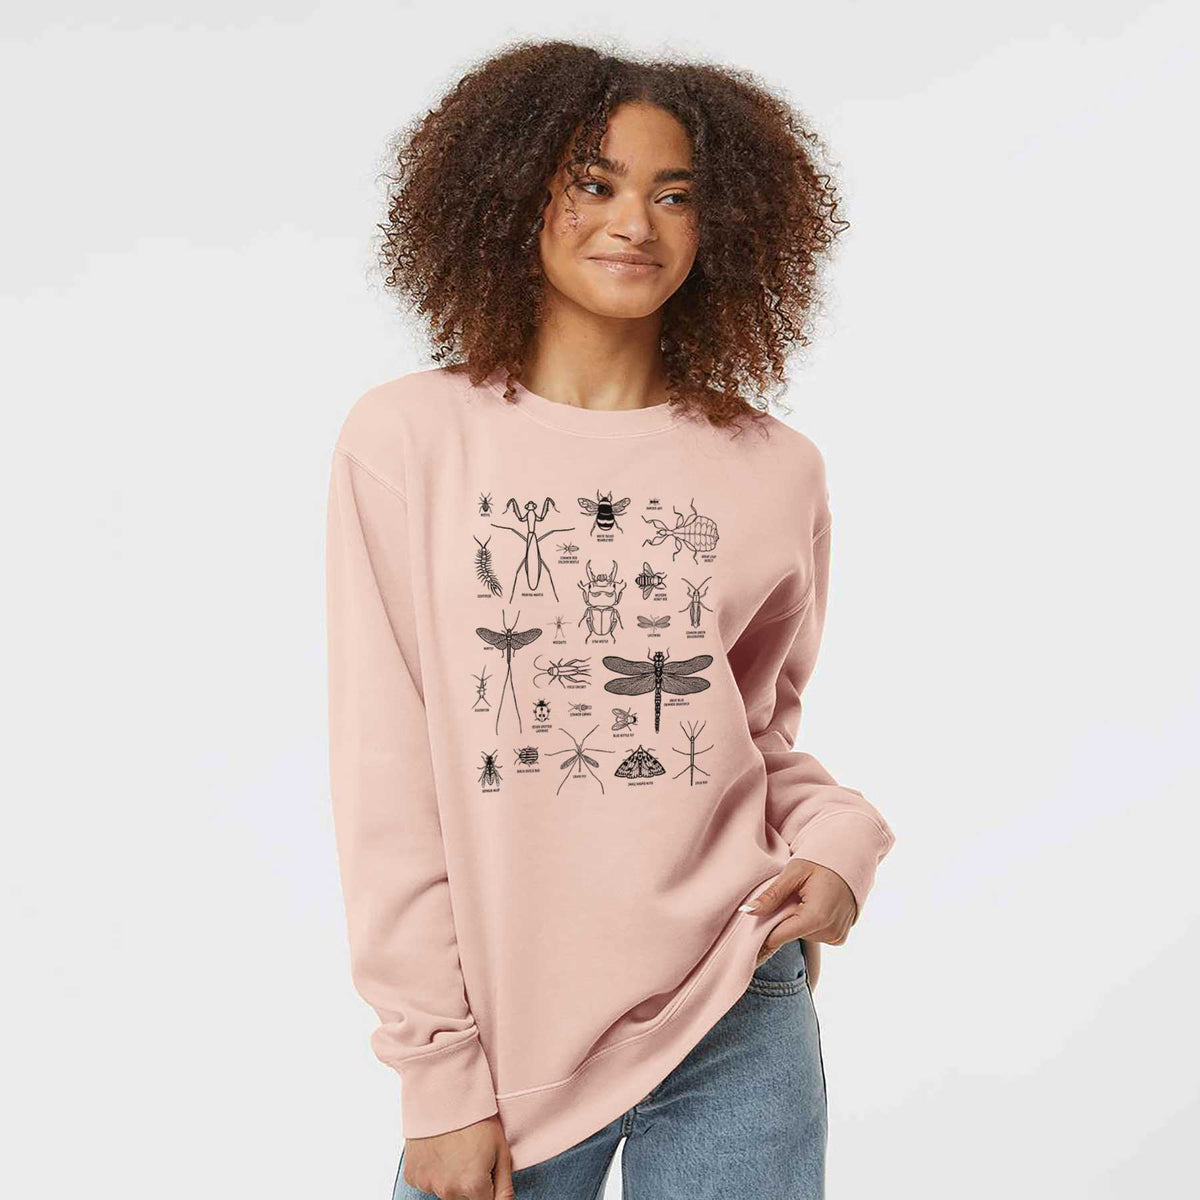 Chart of Arthropods/Insects - Unisex Pigment Dyed Crew Sweatshirt